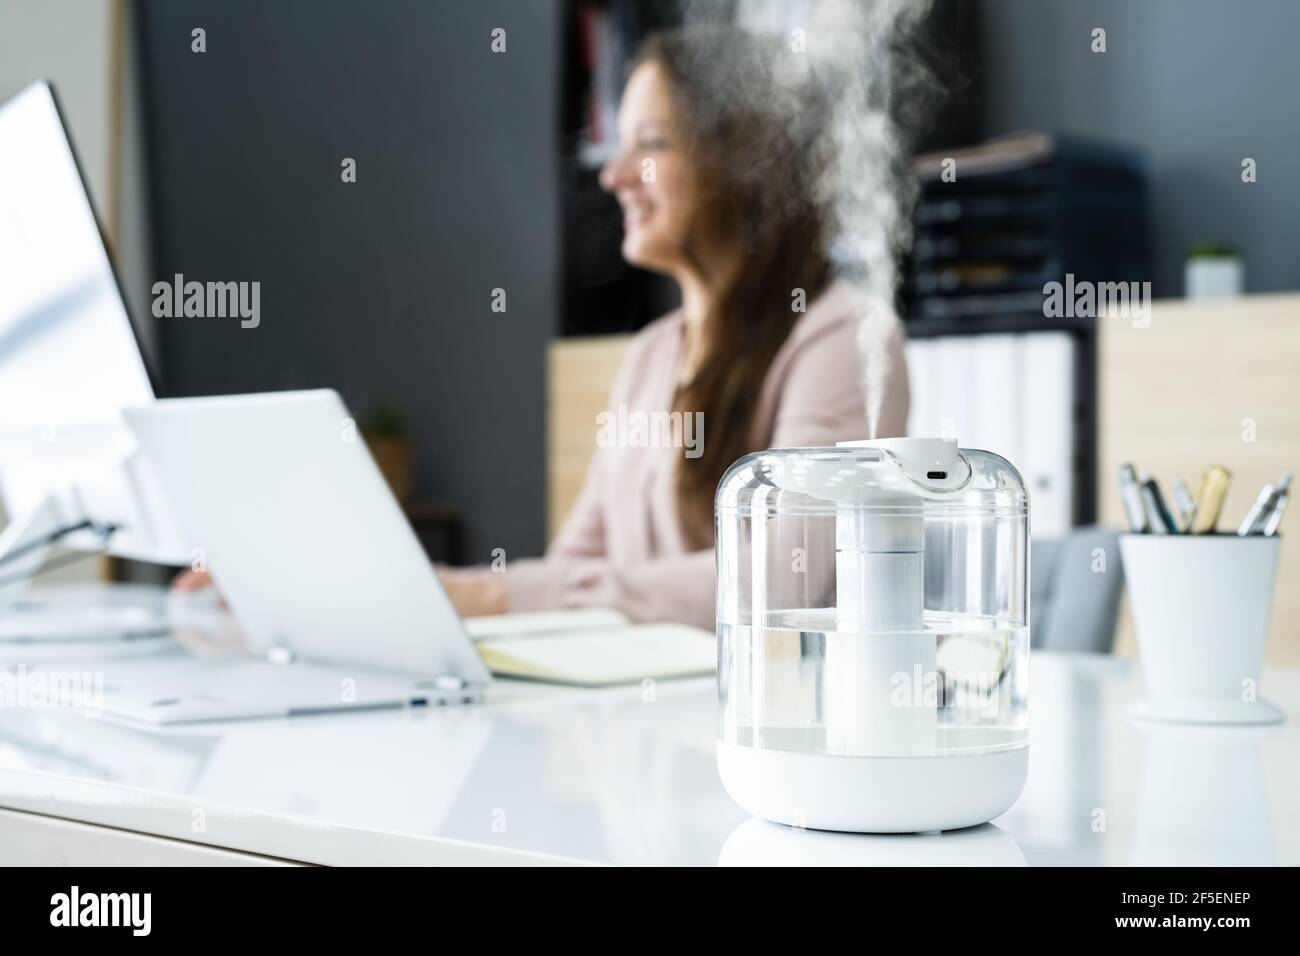 Air Humidifier Device At Office Desk Near Woman Working Stock Photo - Alamy